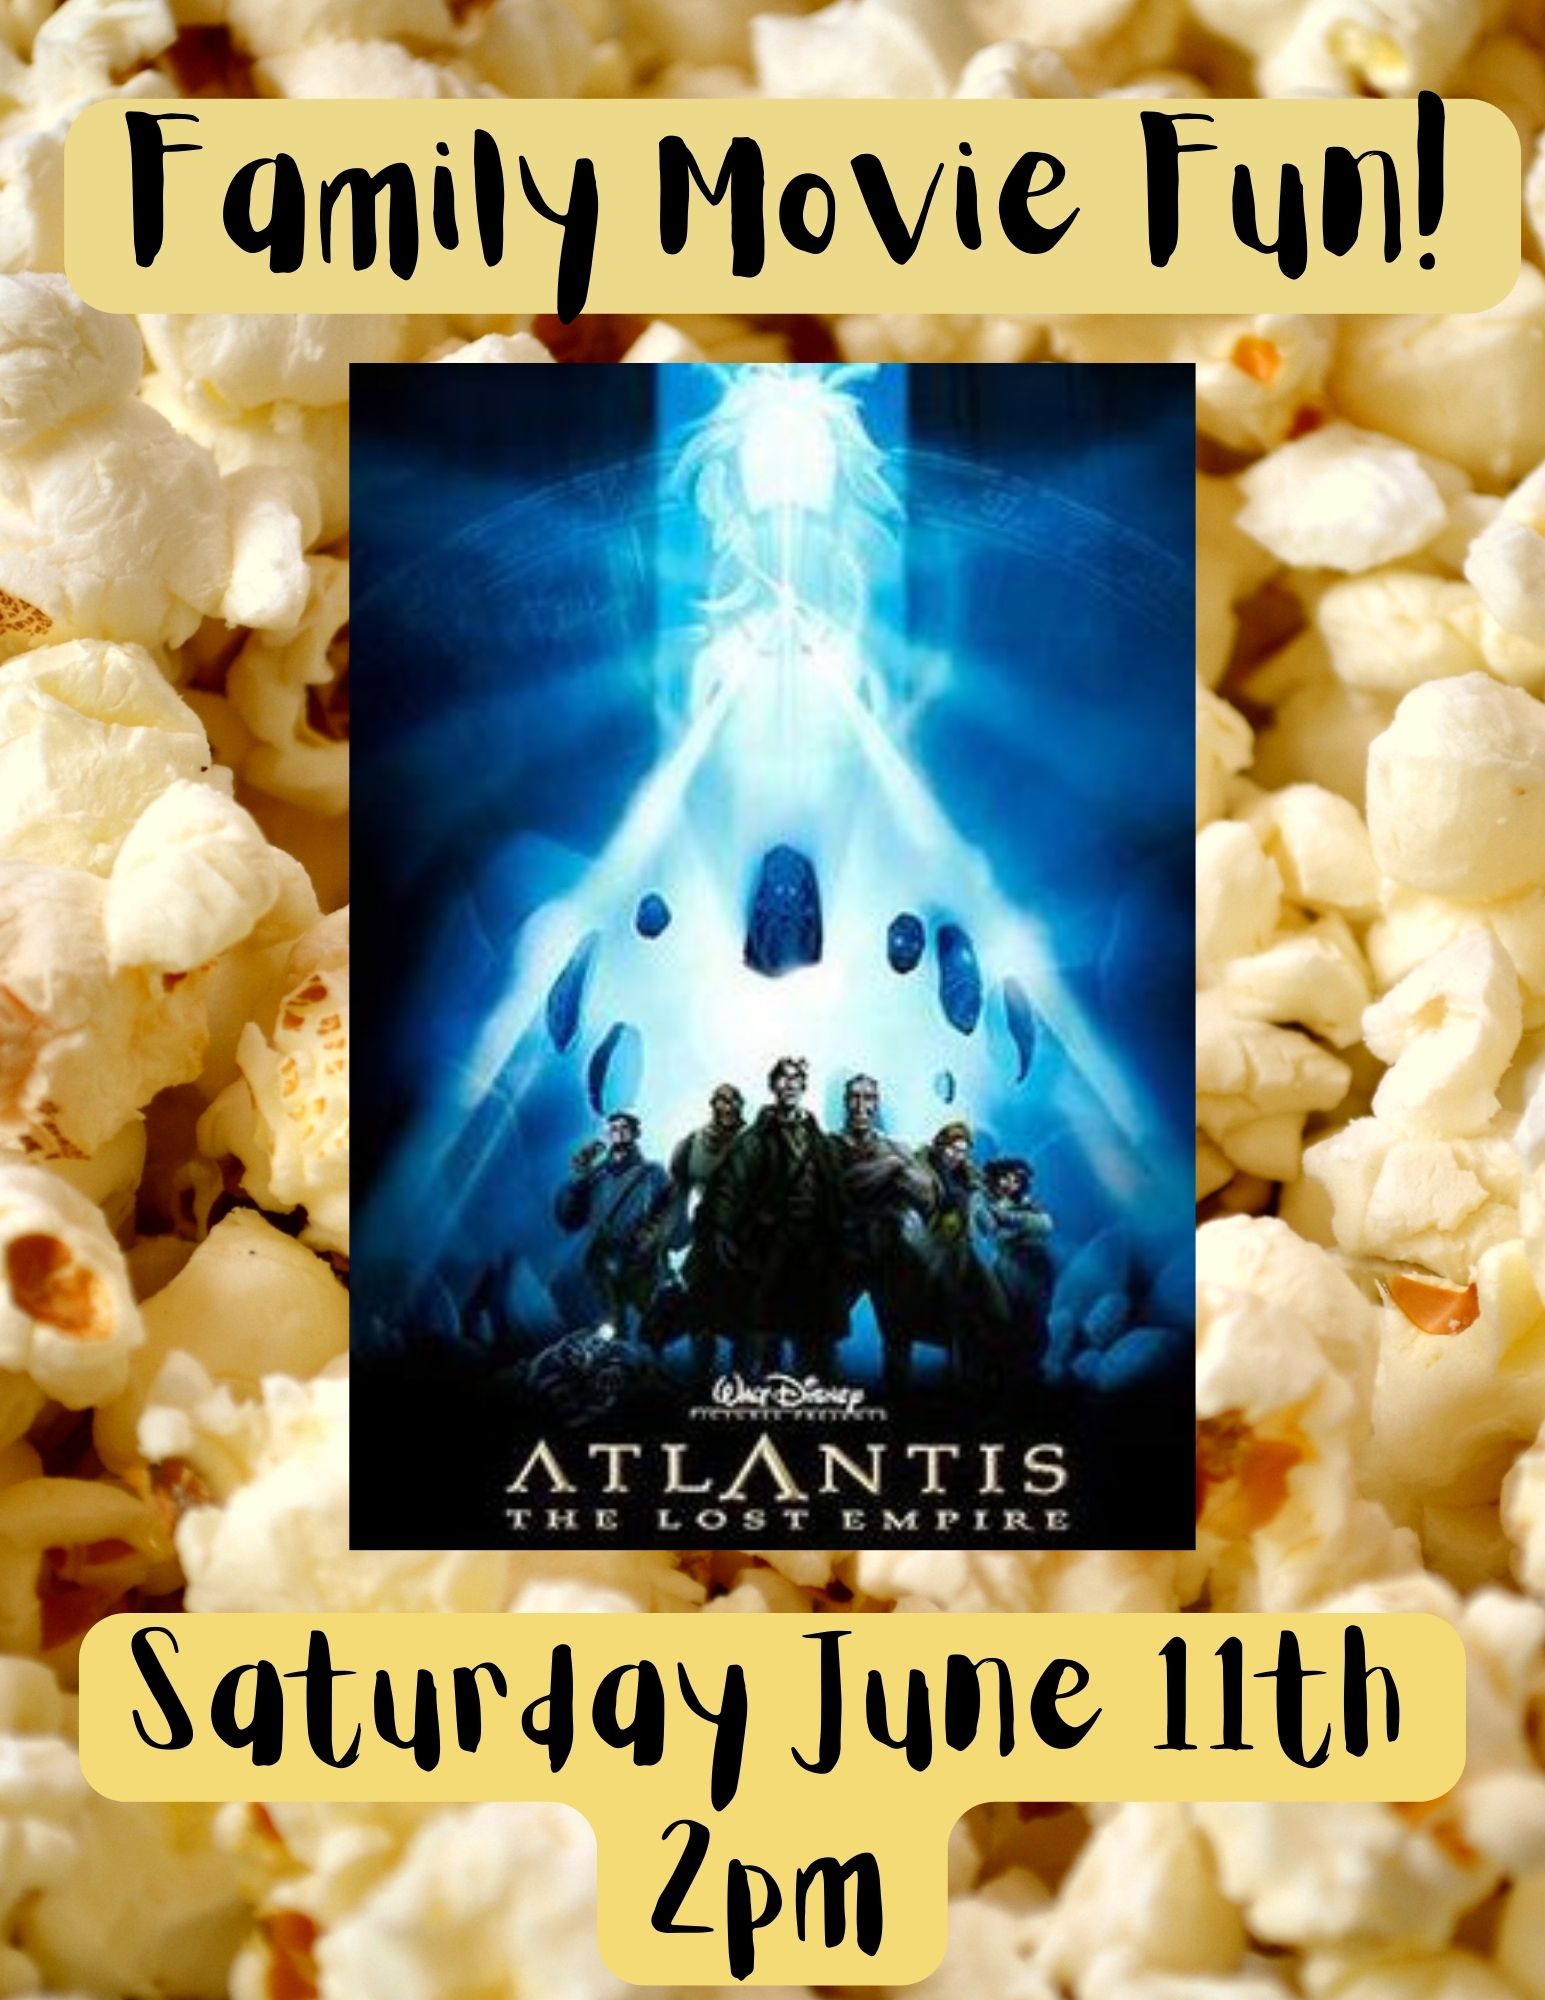 Popcorn background with Atlantis the Lost Empire movie poster image of characters. Family Movie Fun, Saturday, June 11th at 2 pm.